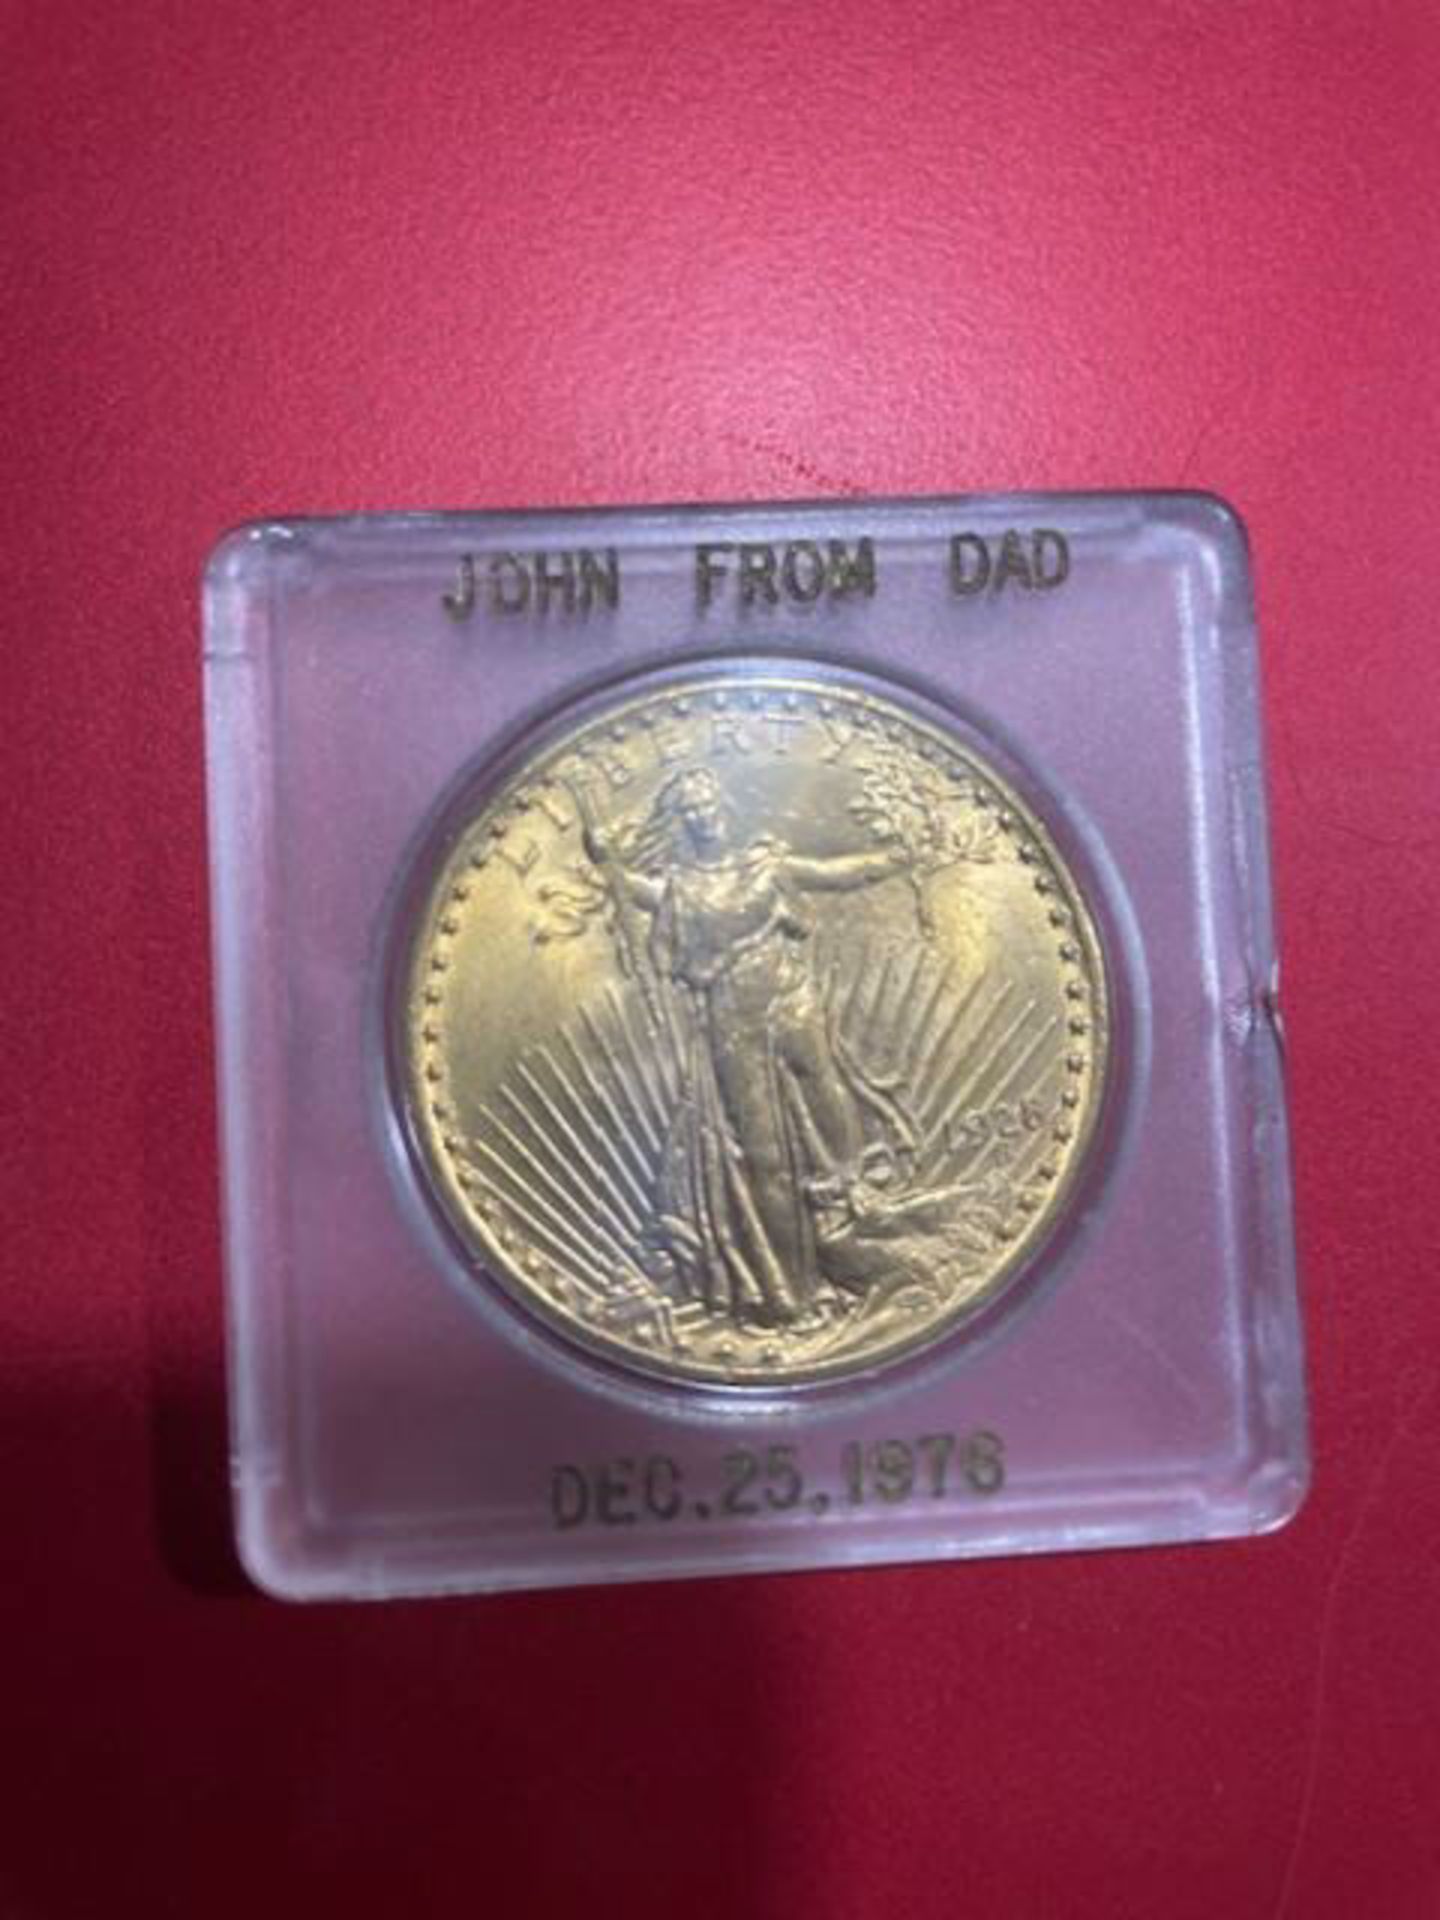 1928 St. Gaudens Double Eagle $20 Gold Coin - Image 7 of 12